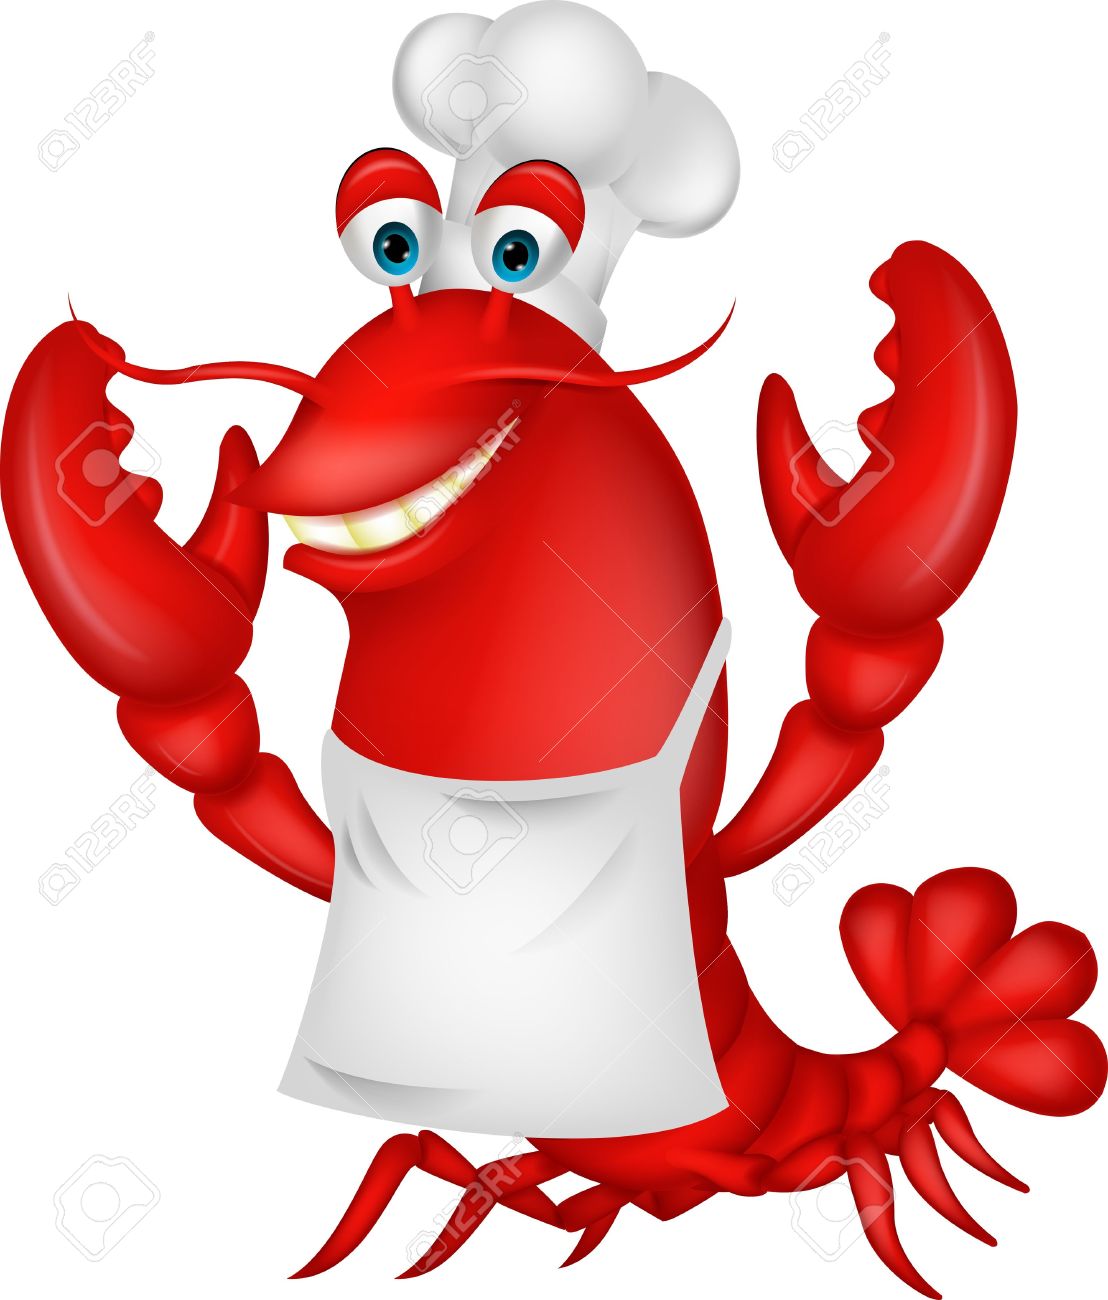 Cute free download best. Lobster clipart lobster tail